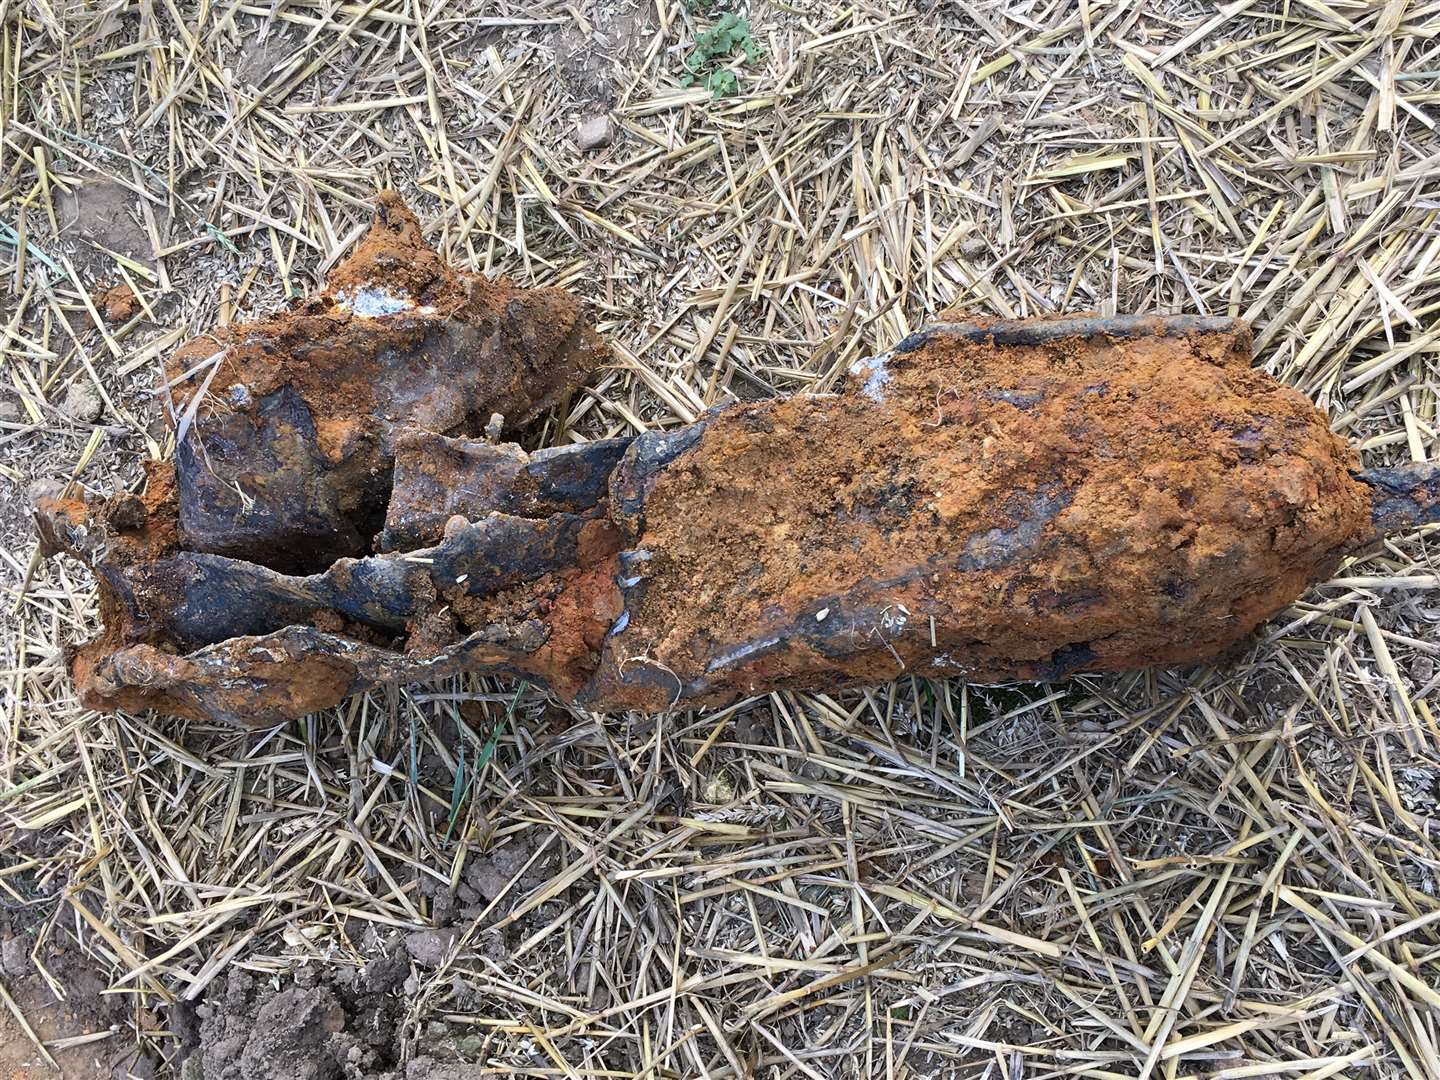 The first major find: part of the rocket's combustion chamber